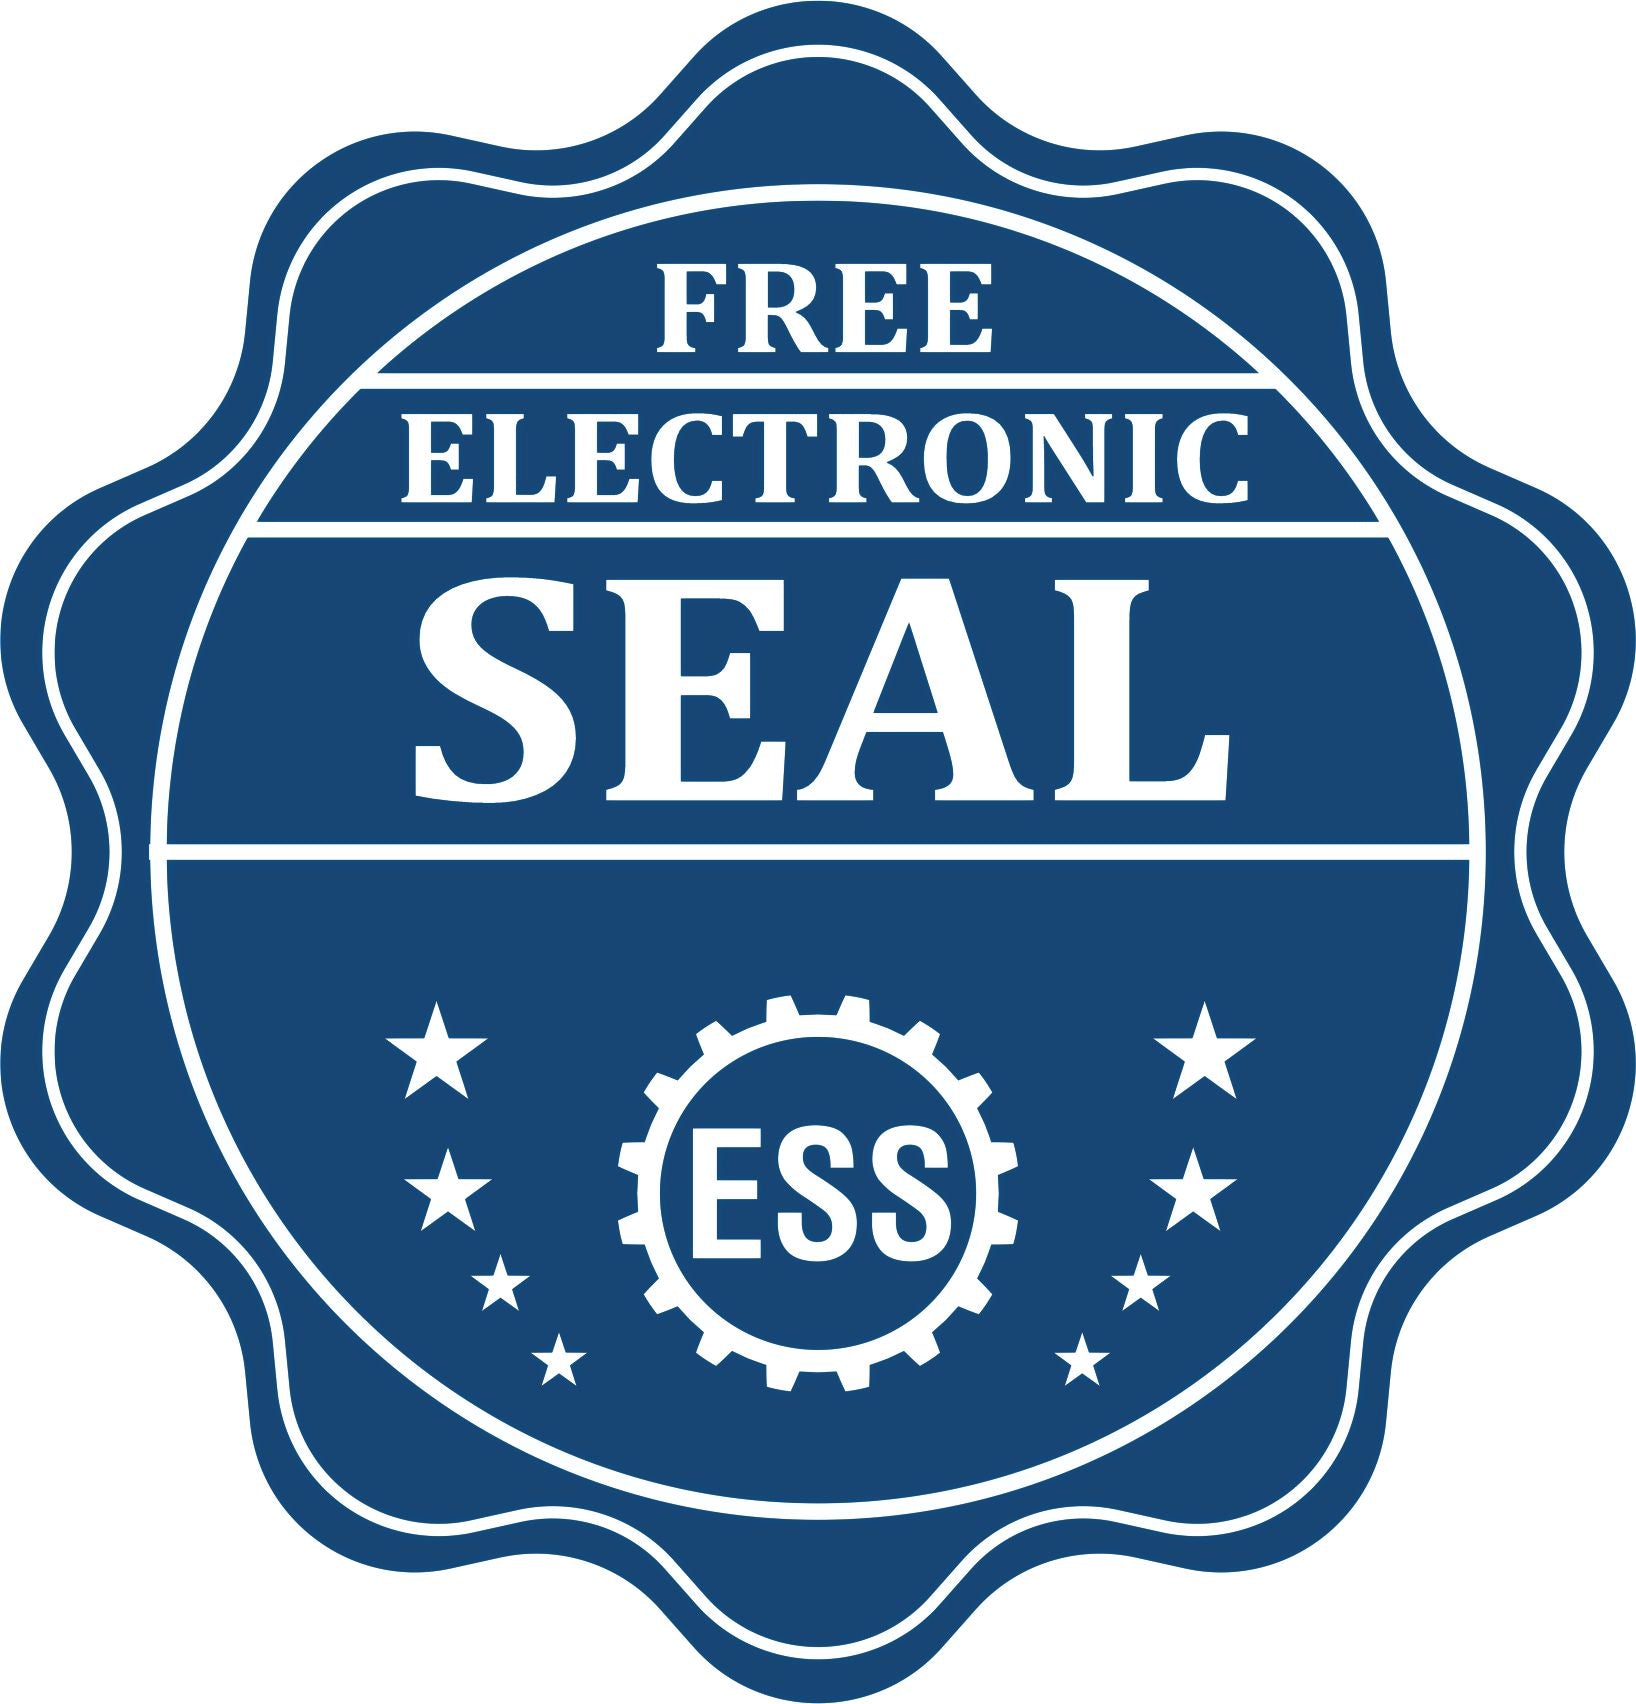 A badge showing a free electronic seal for the Premium MaxLight Pre-Inked Montana Geology Stamp with stars and the ESS gear on the emblem.